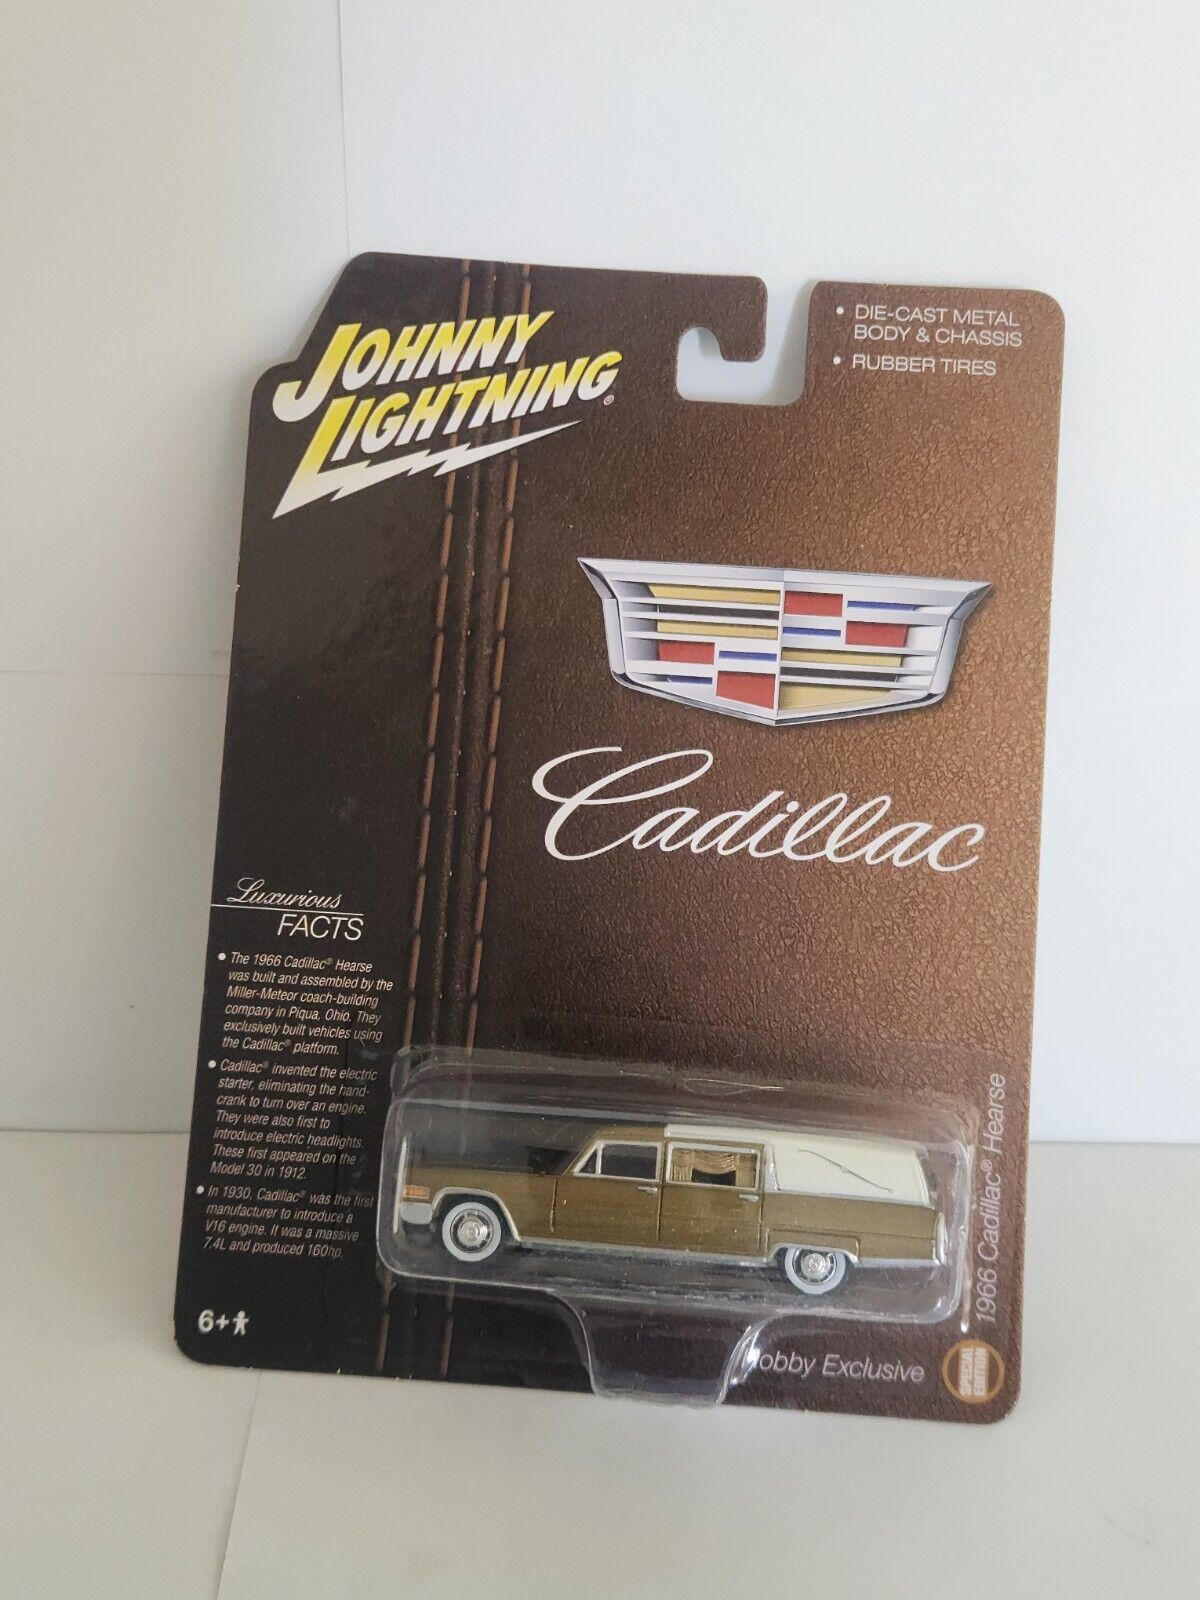 Johnny Lightning 1966 Cadillac Hearse Hobby Exclusive L26